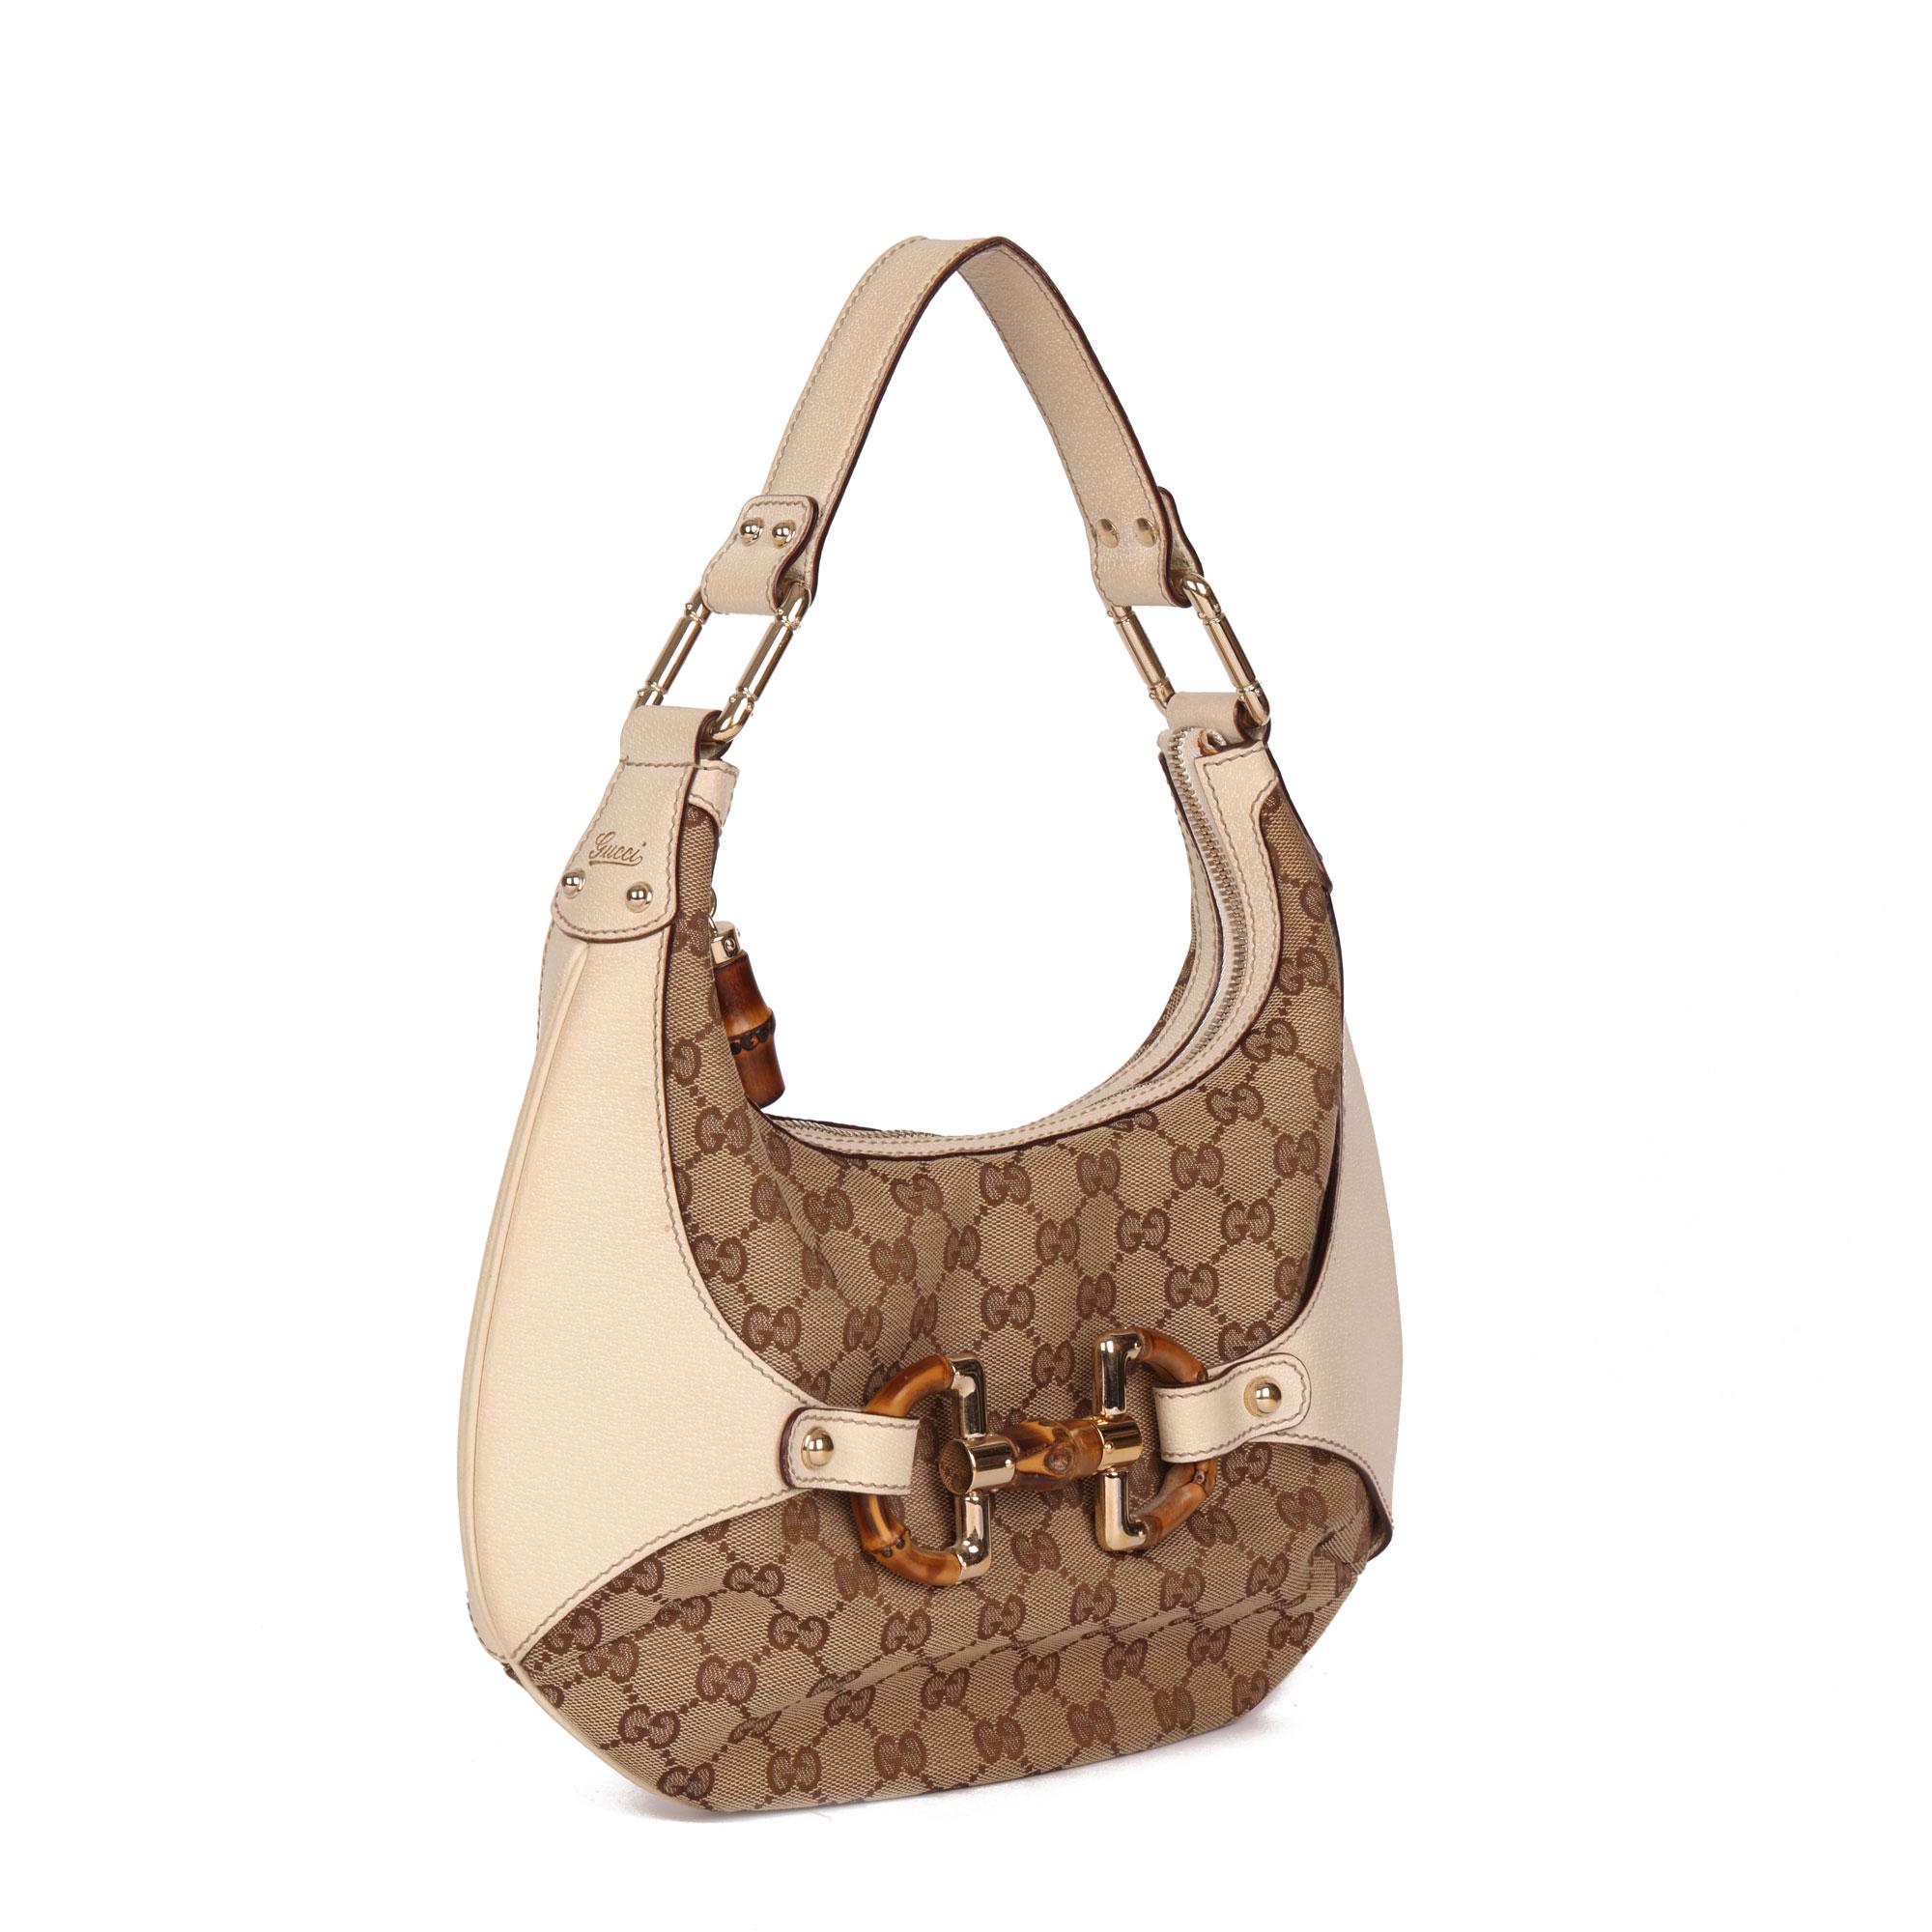 GUCCI
GG Supreme Canvas & Cream Pigskin Leather Bamboo Shoulder Bag 

Xupes Reference: CB482
Serial Number: 154378 001364
Age (Circa): 2000
Accompanied By: Gucci Dust Bag
Authenticity Details: Date Stamp (Made in Italy)
Gender: Ladies
Type: Top